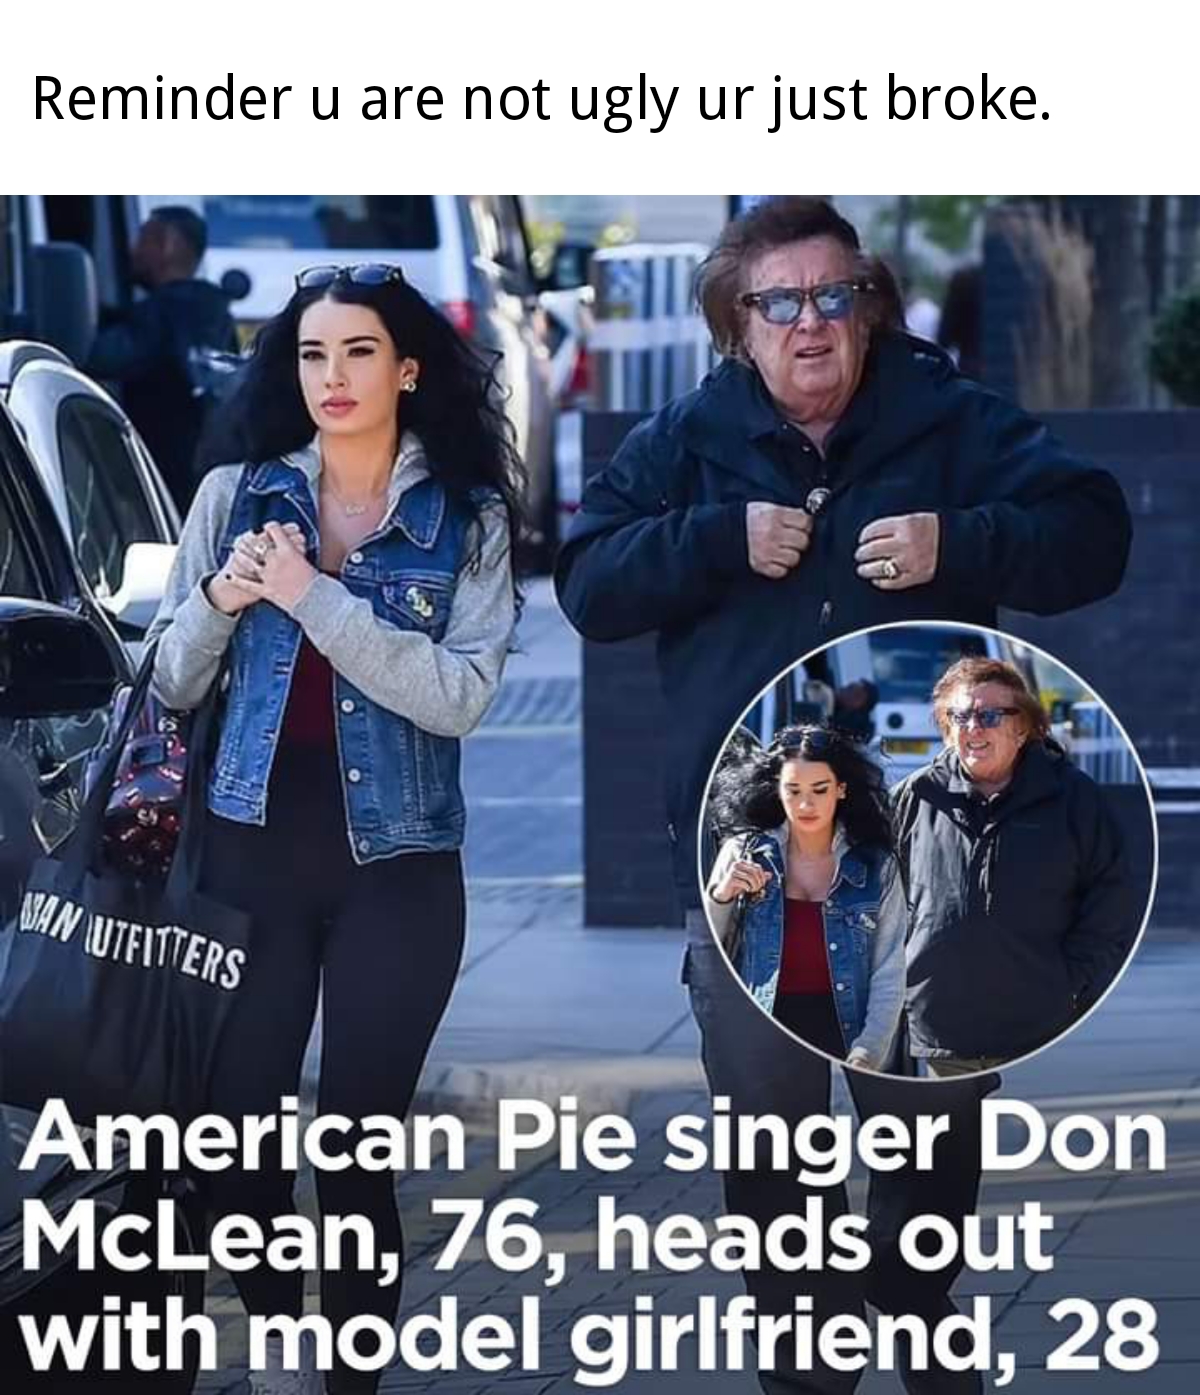 monday morning randomness - american colors - Reminder u are not ugly ur just broke. Man Utfitters American Pie singer Don McLean, 76, heads out with model girlfriend, 28